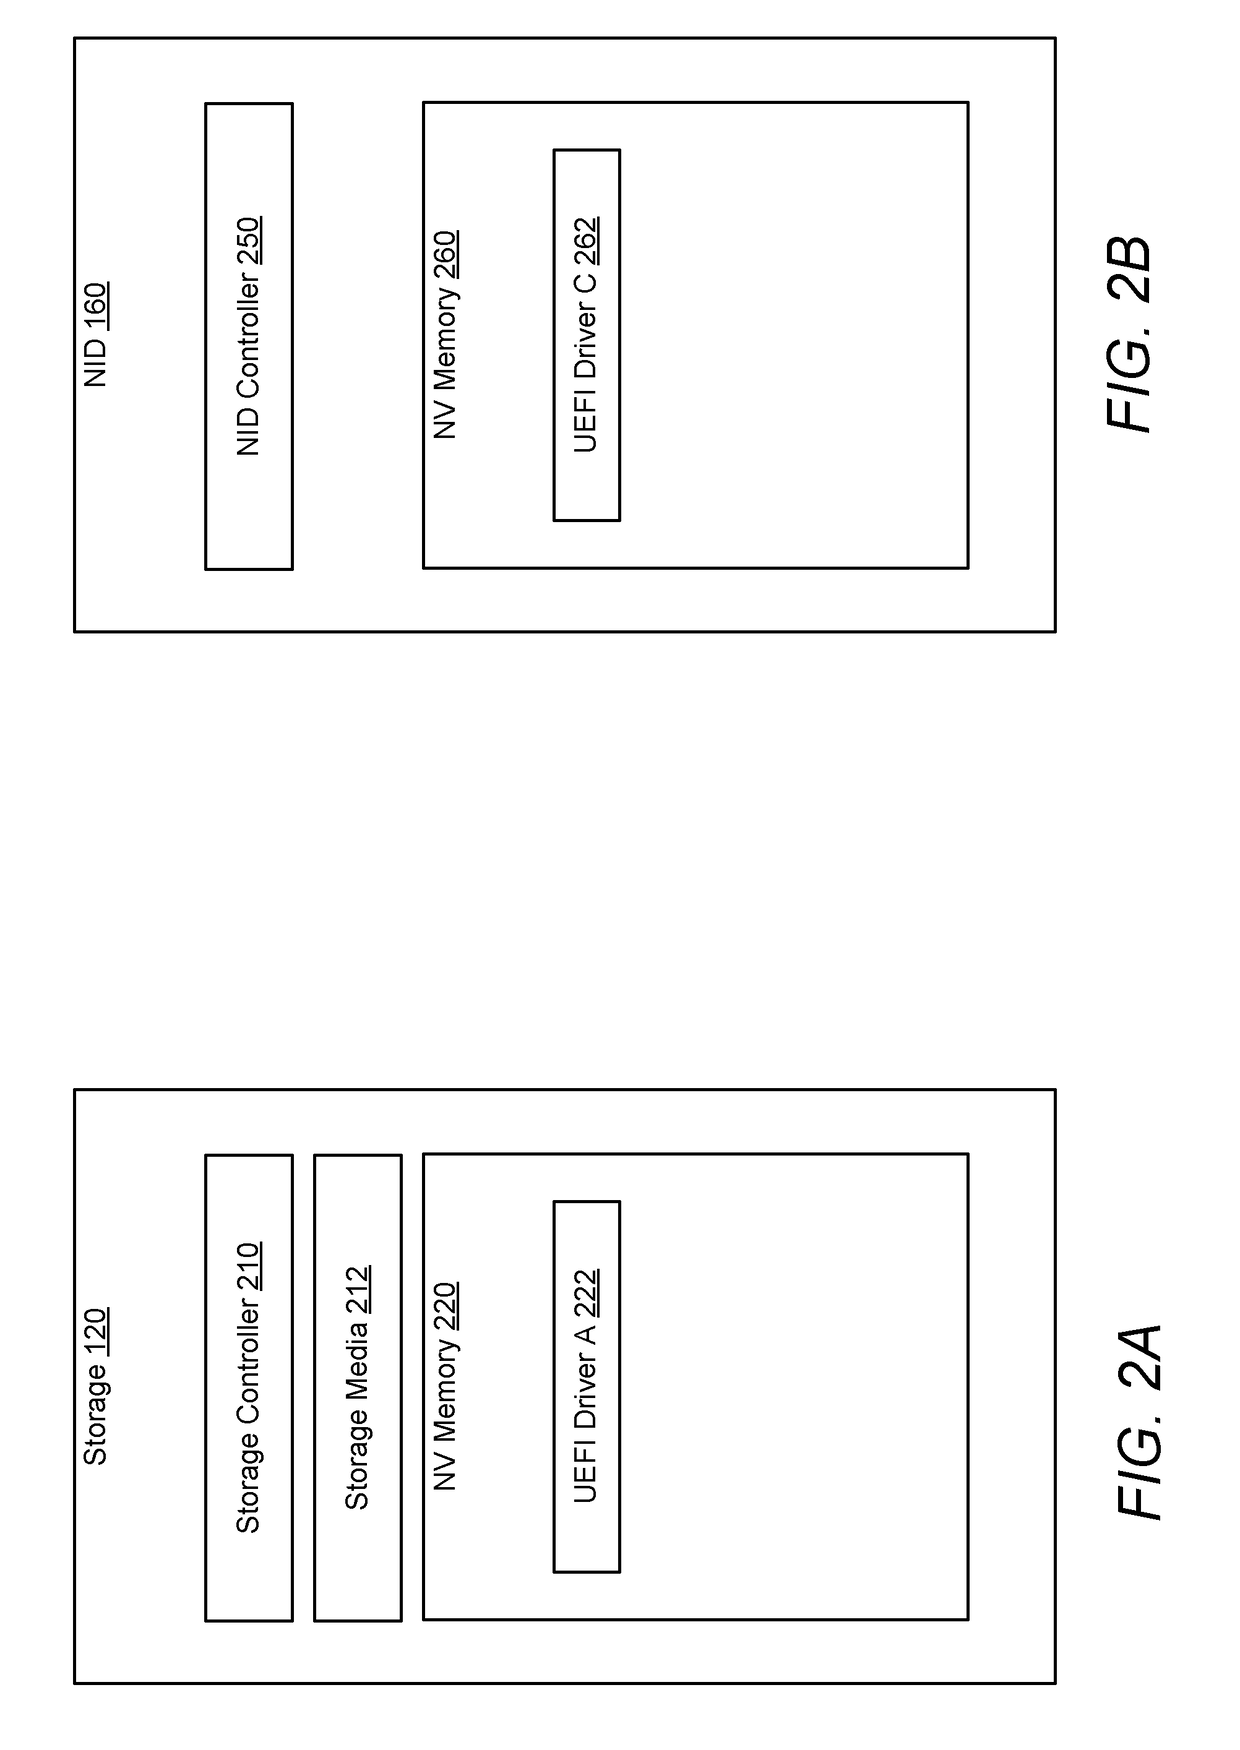 Recovering an information handling system from a secure boot authentication failure